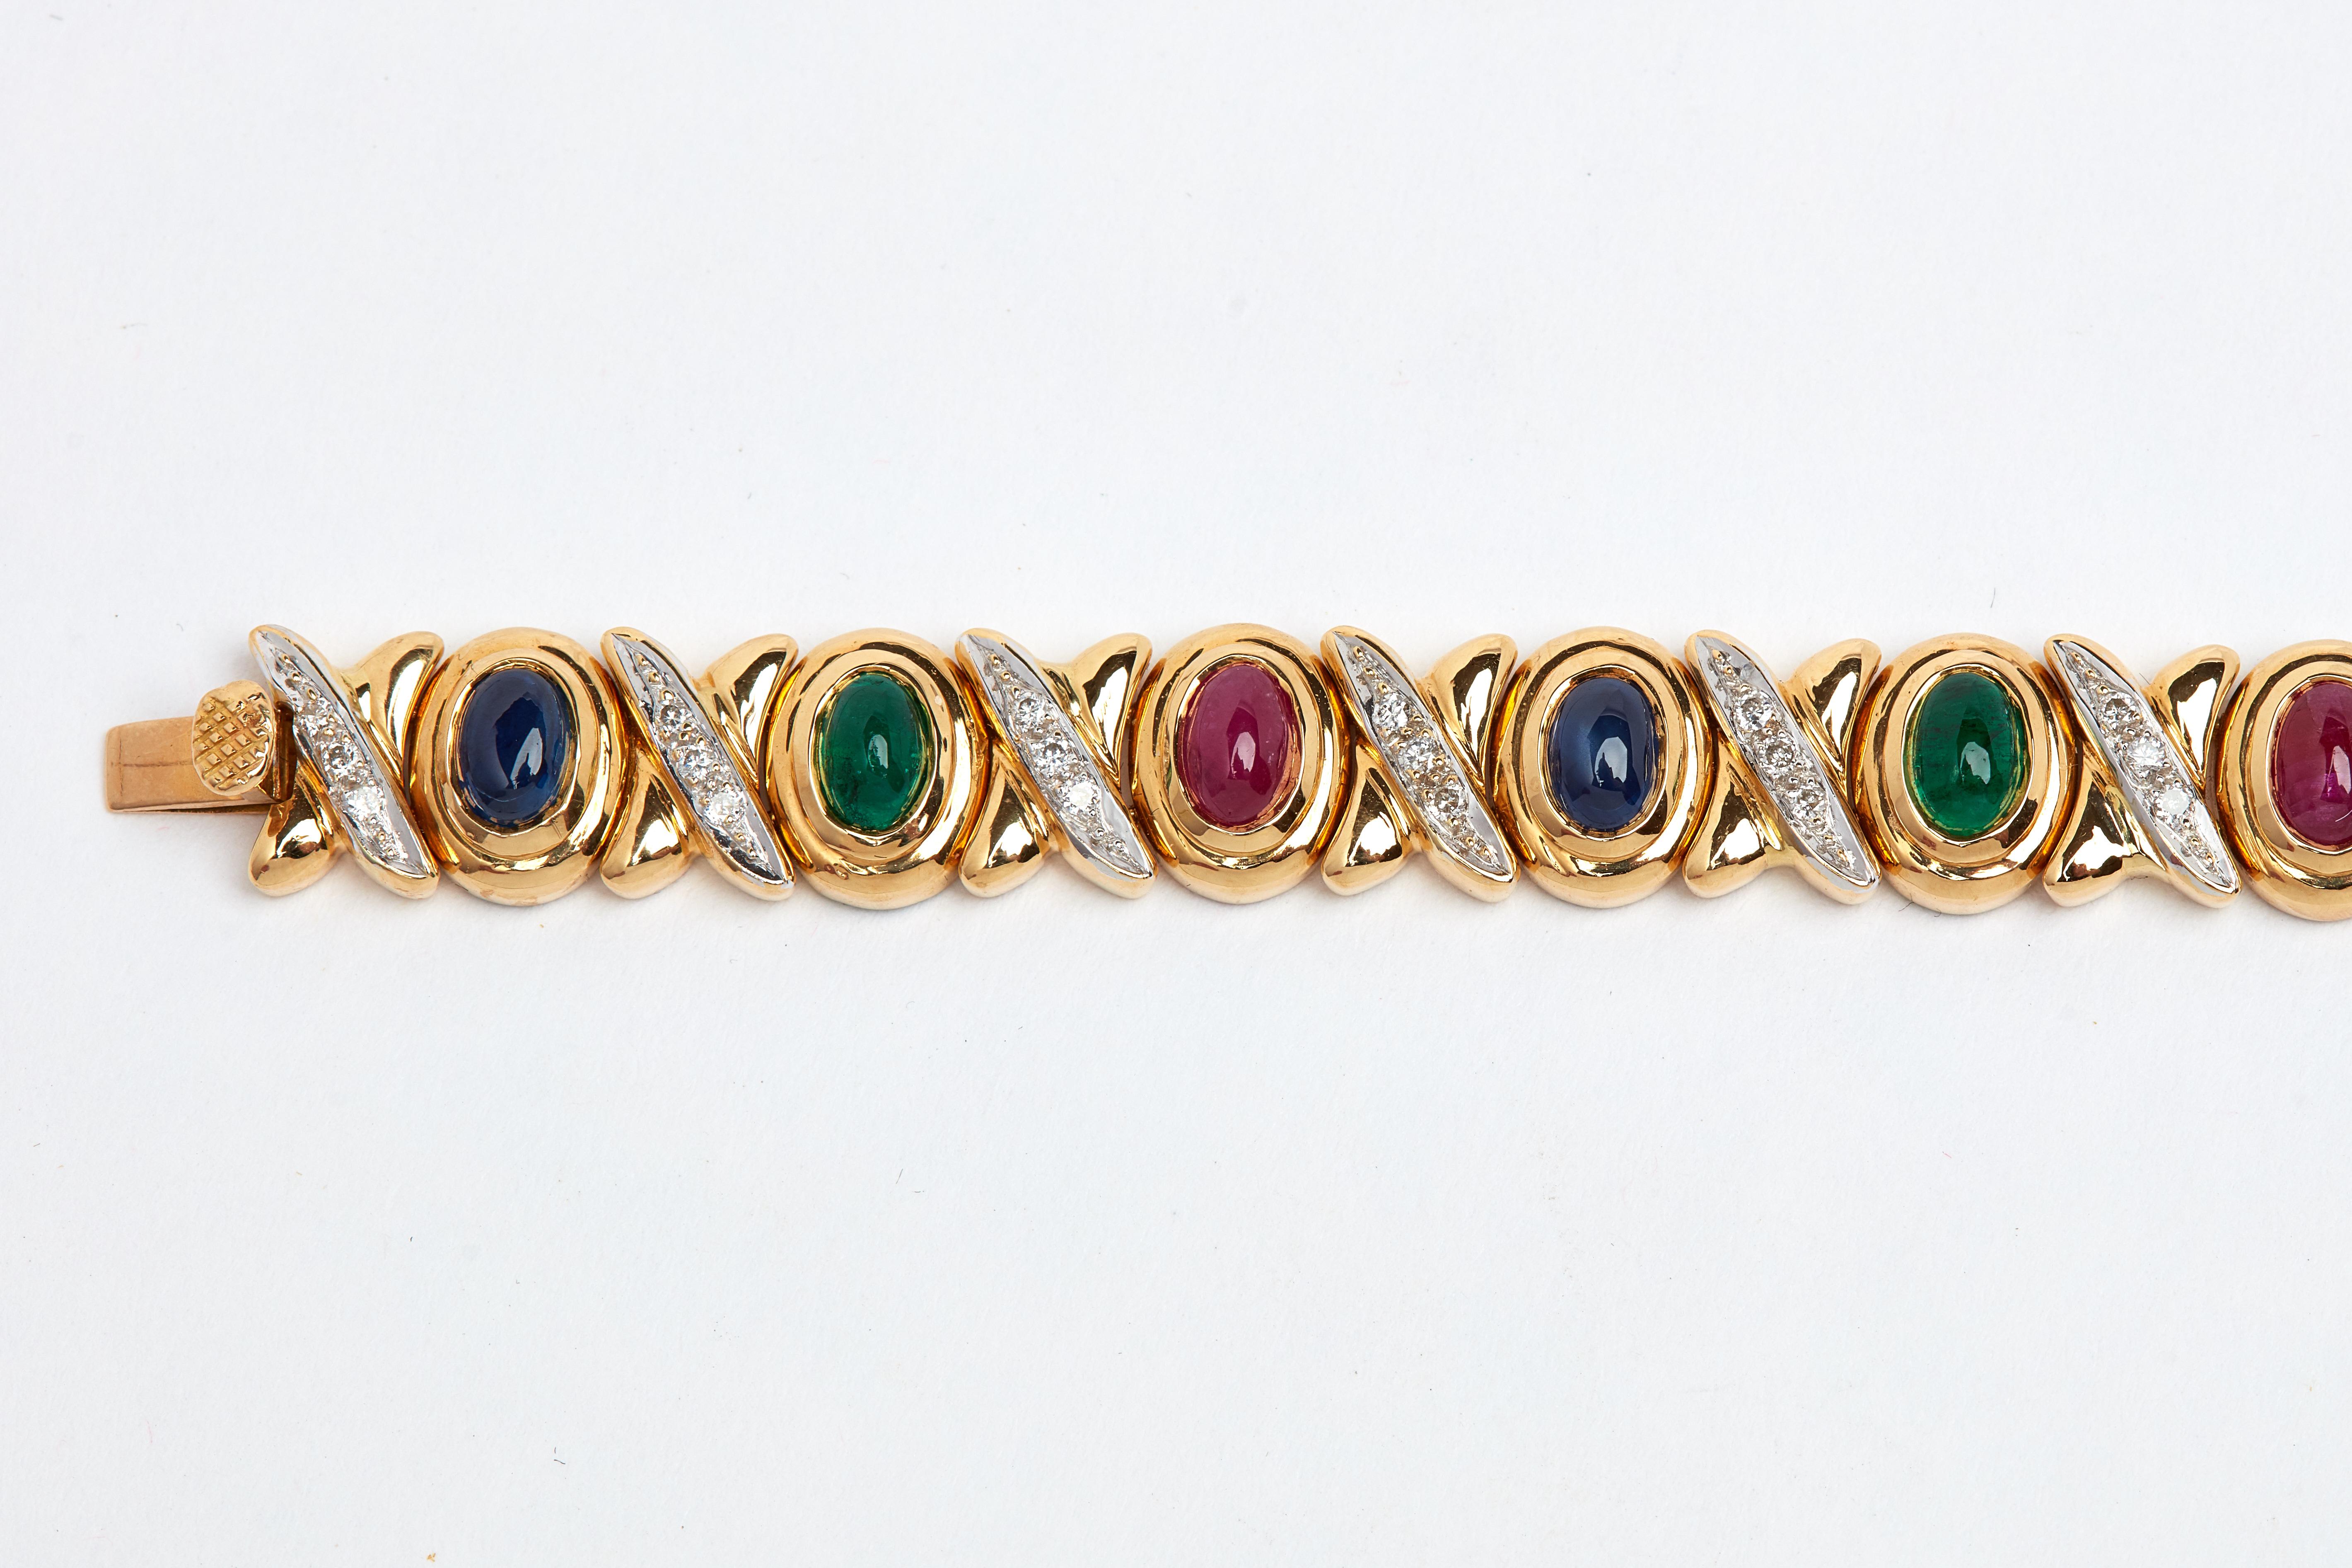 ruby and sapphire bracelet